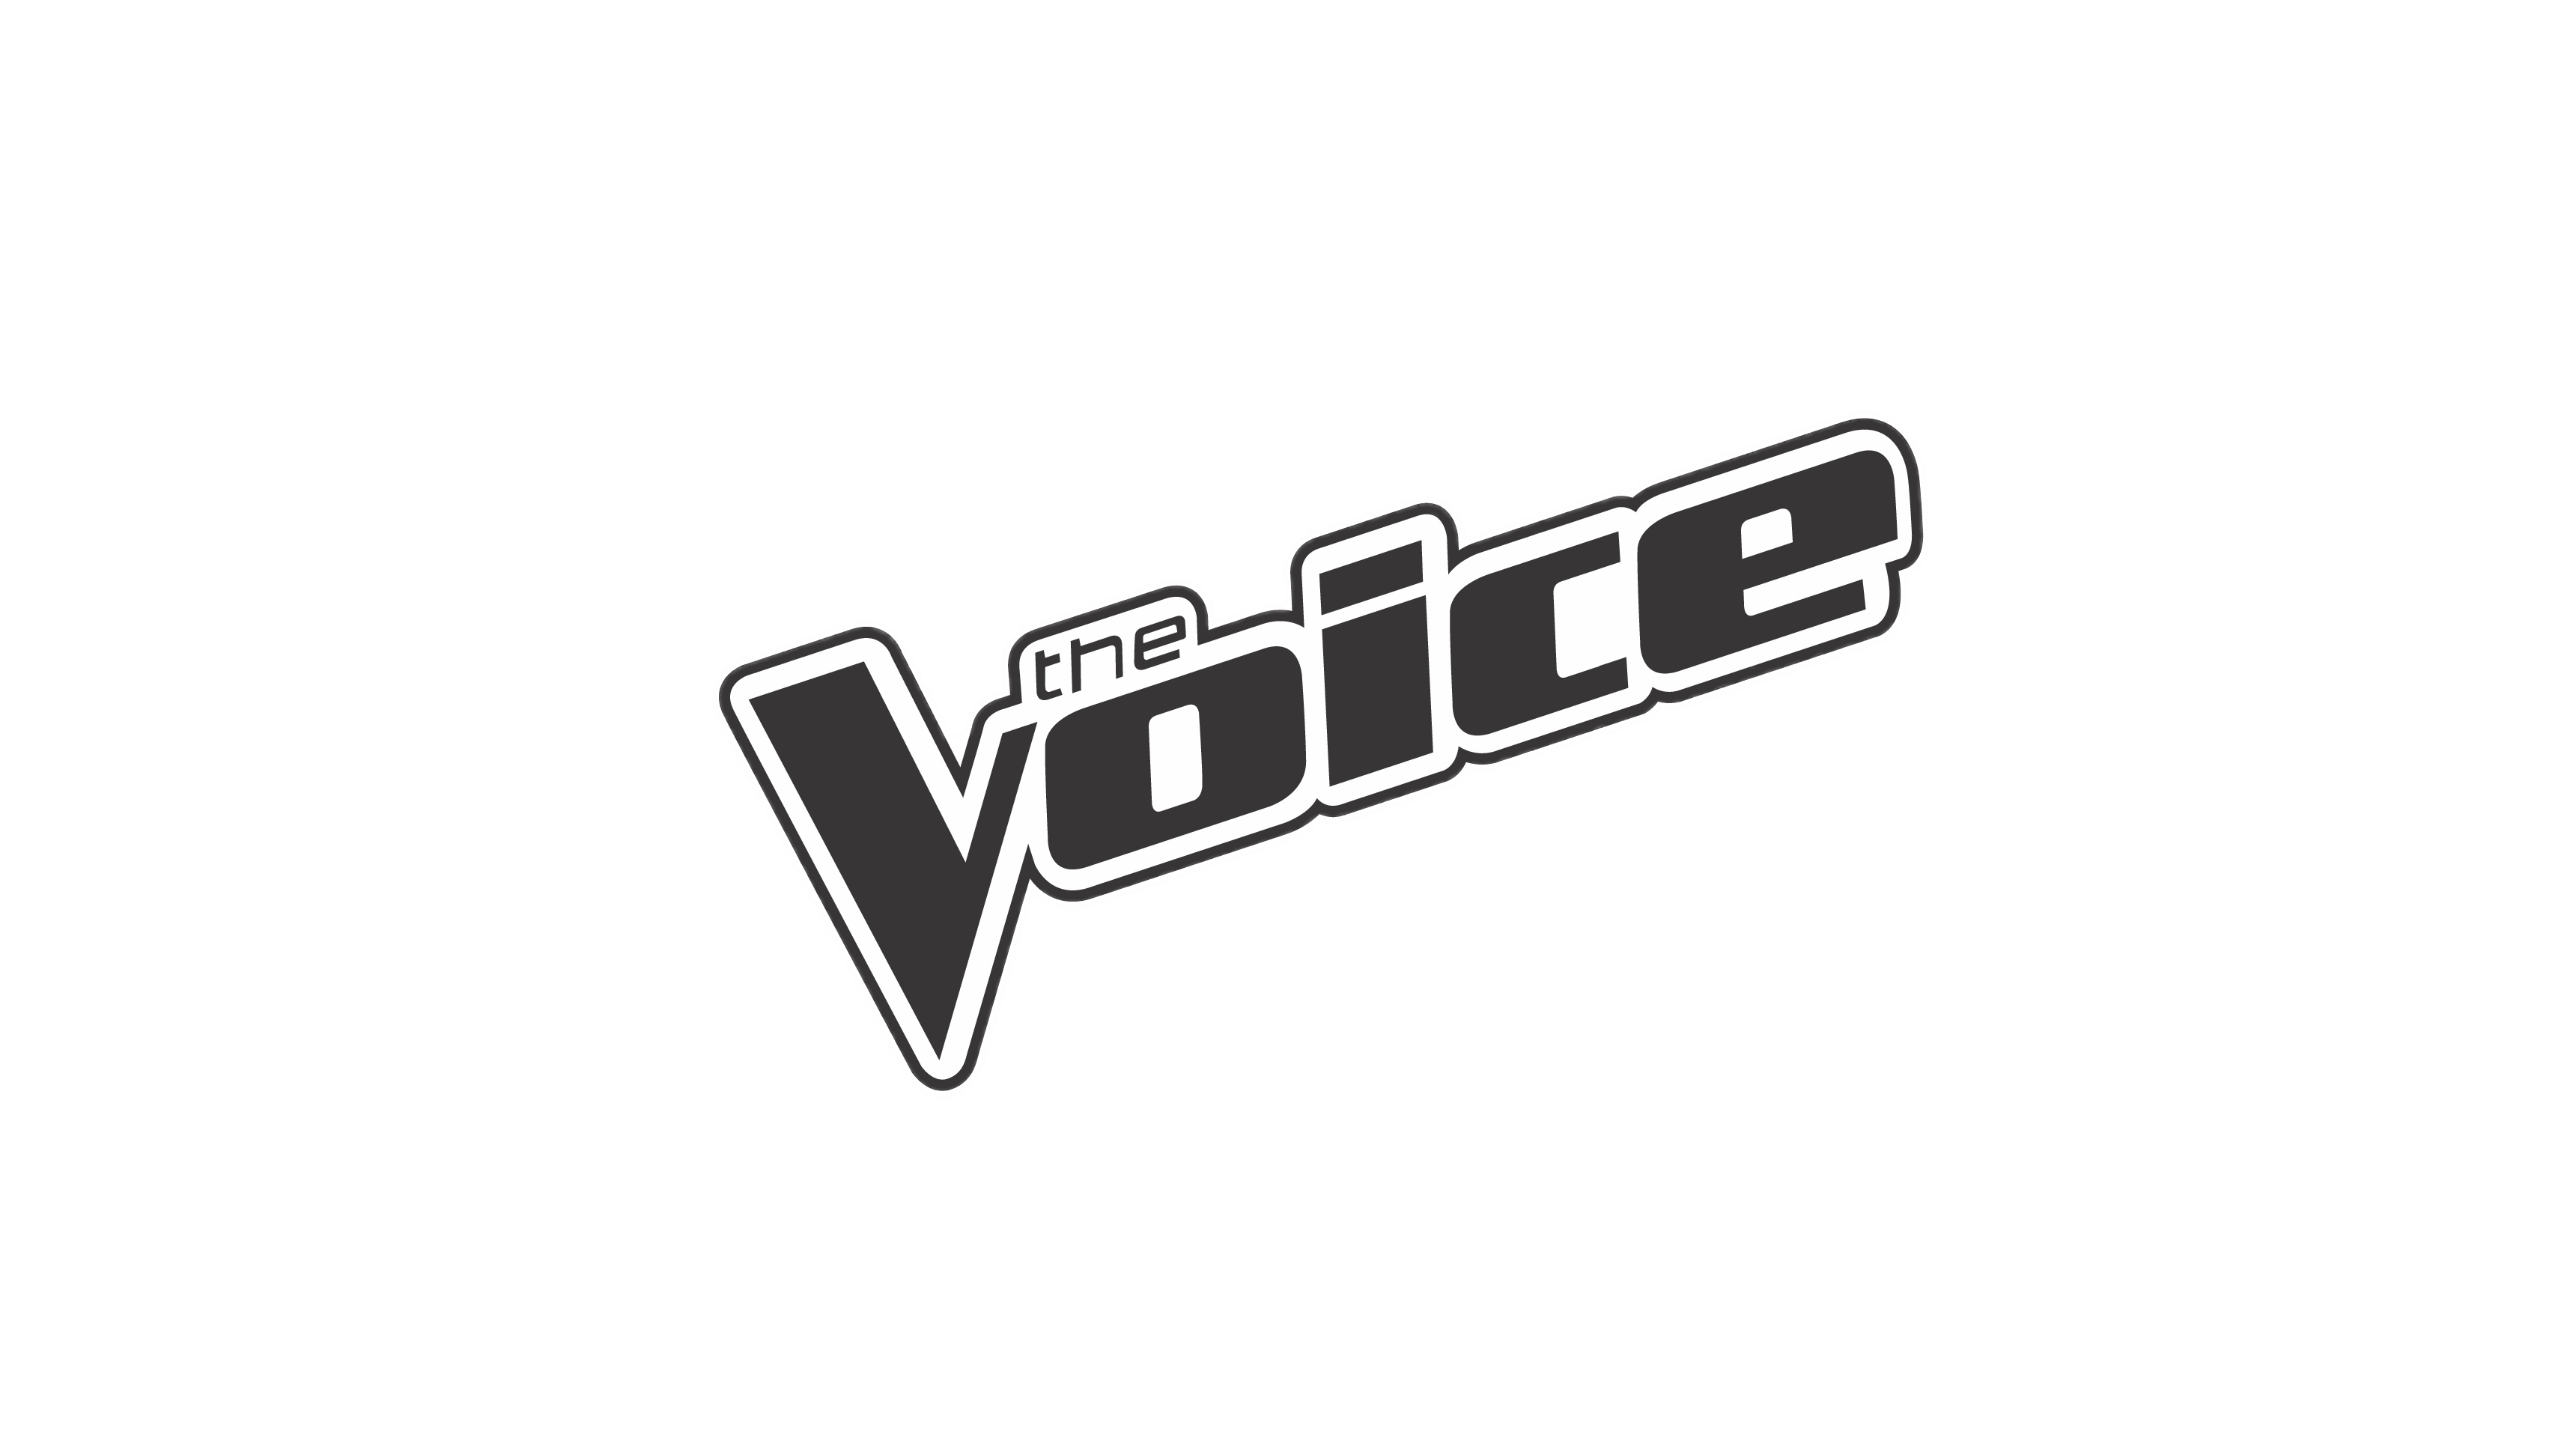 Google Voice Logo - The Voice Logo Black and White transparent PNG